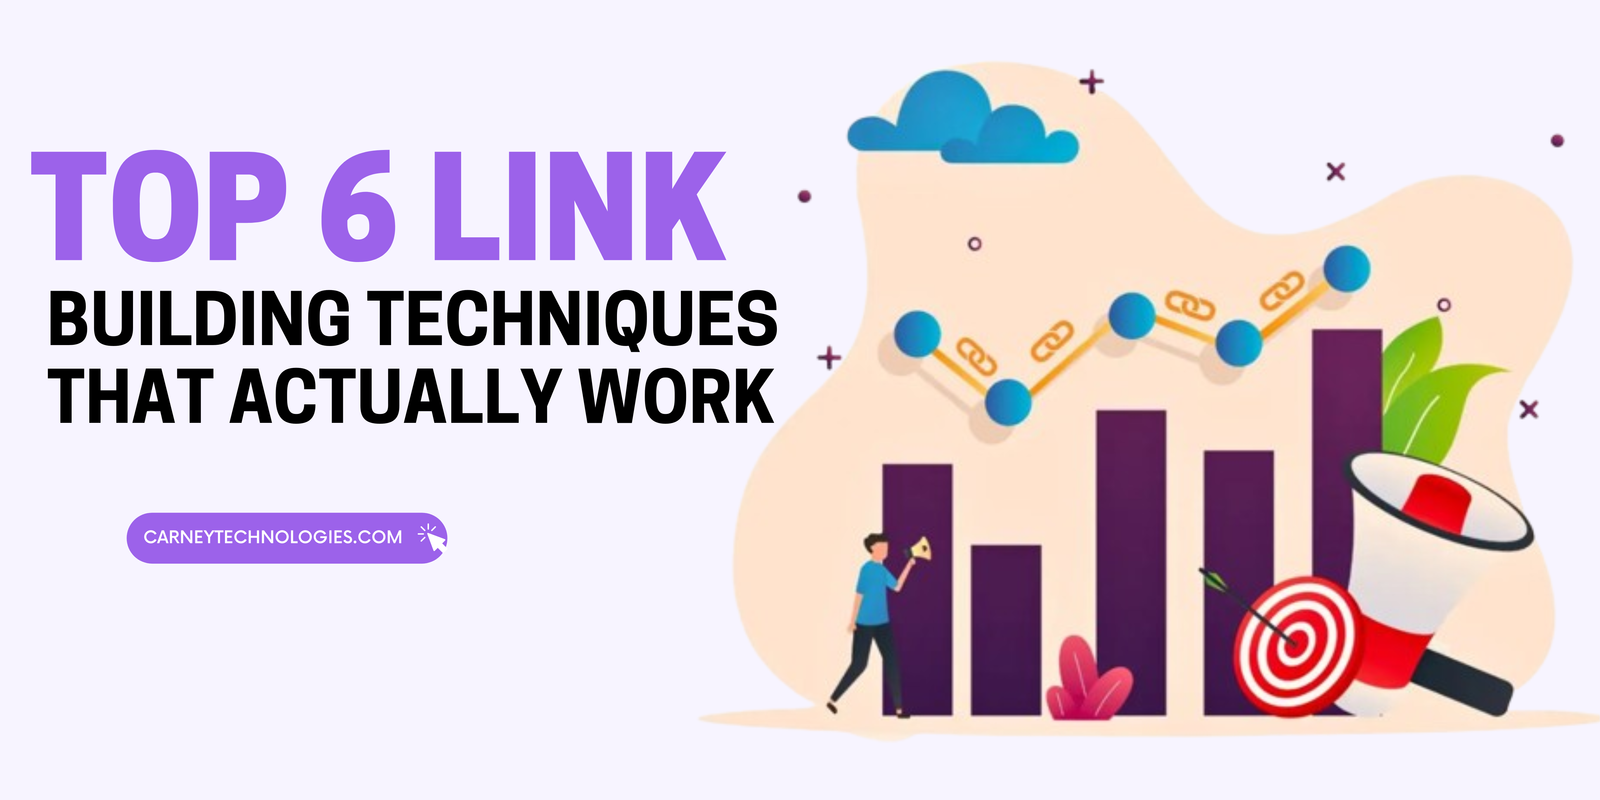 Top 6 Link Building Techniques that Actually Work